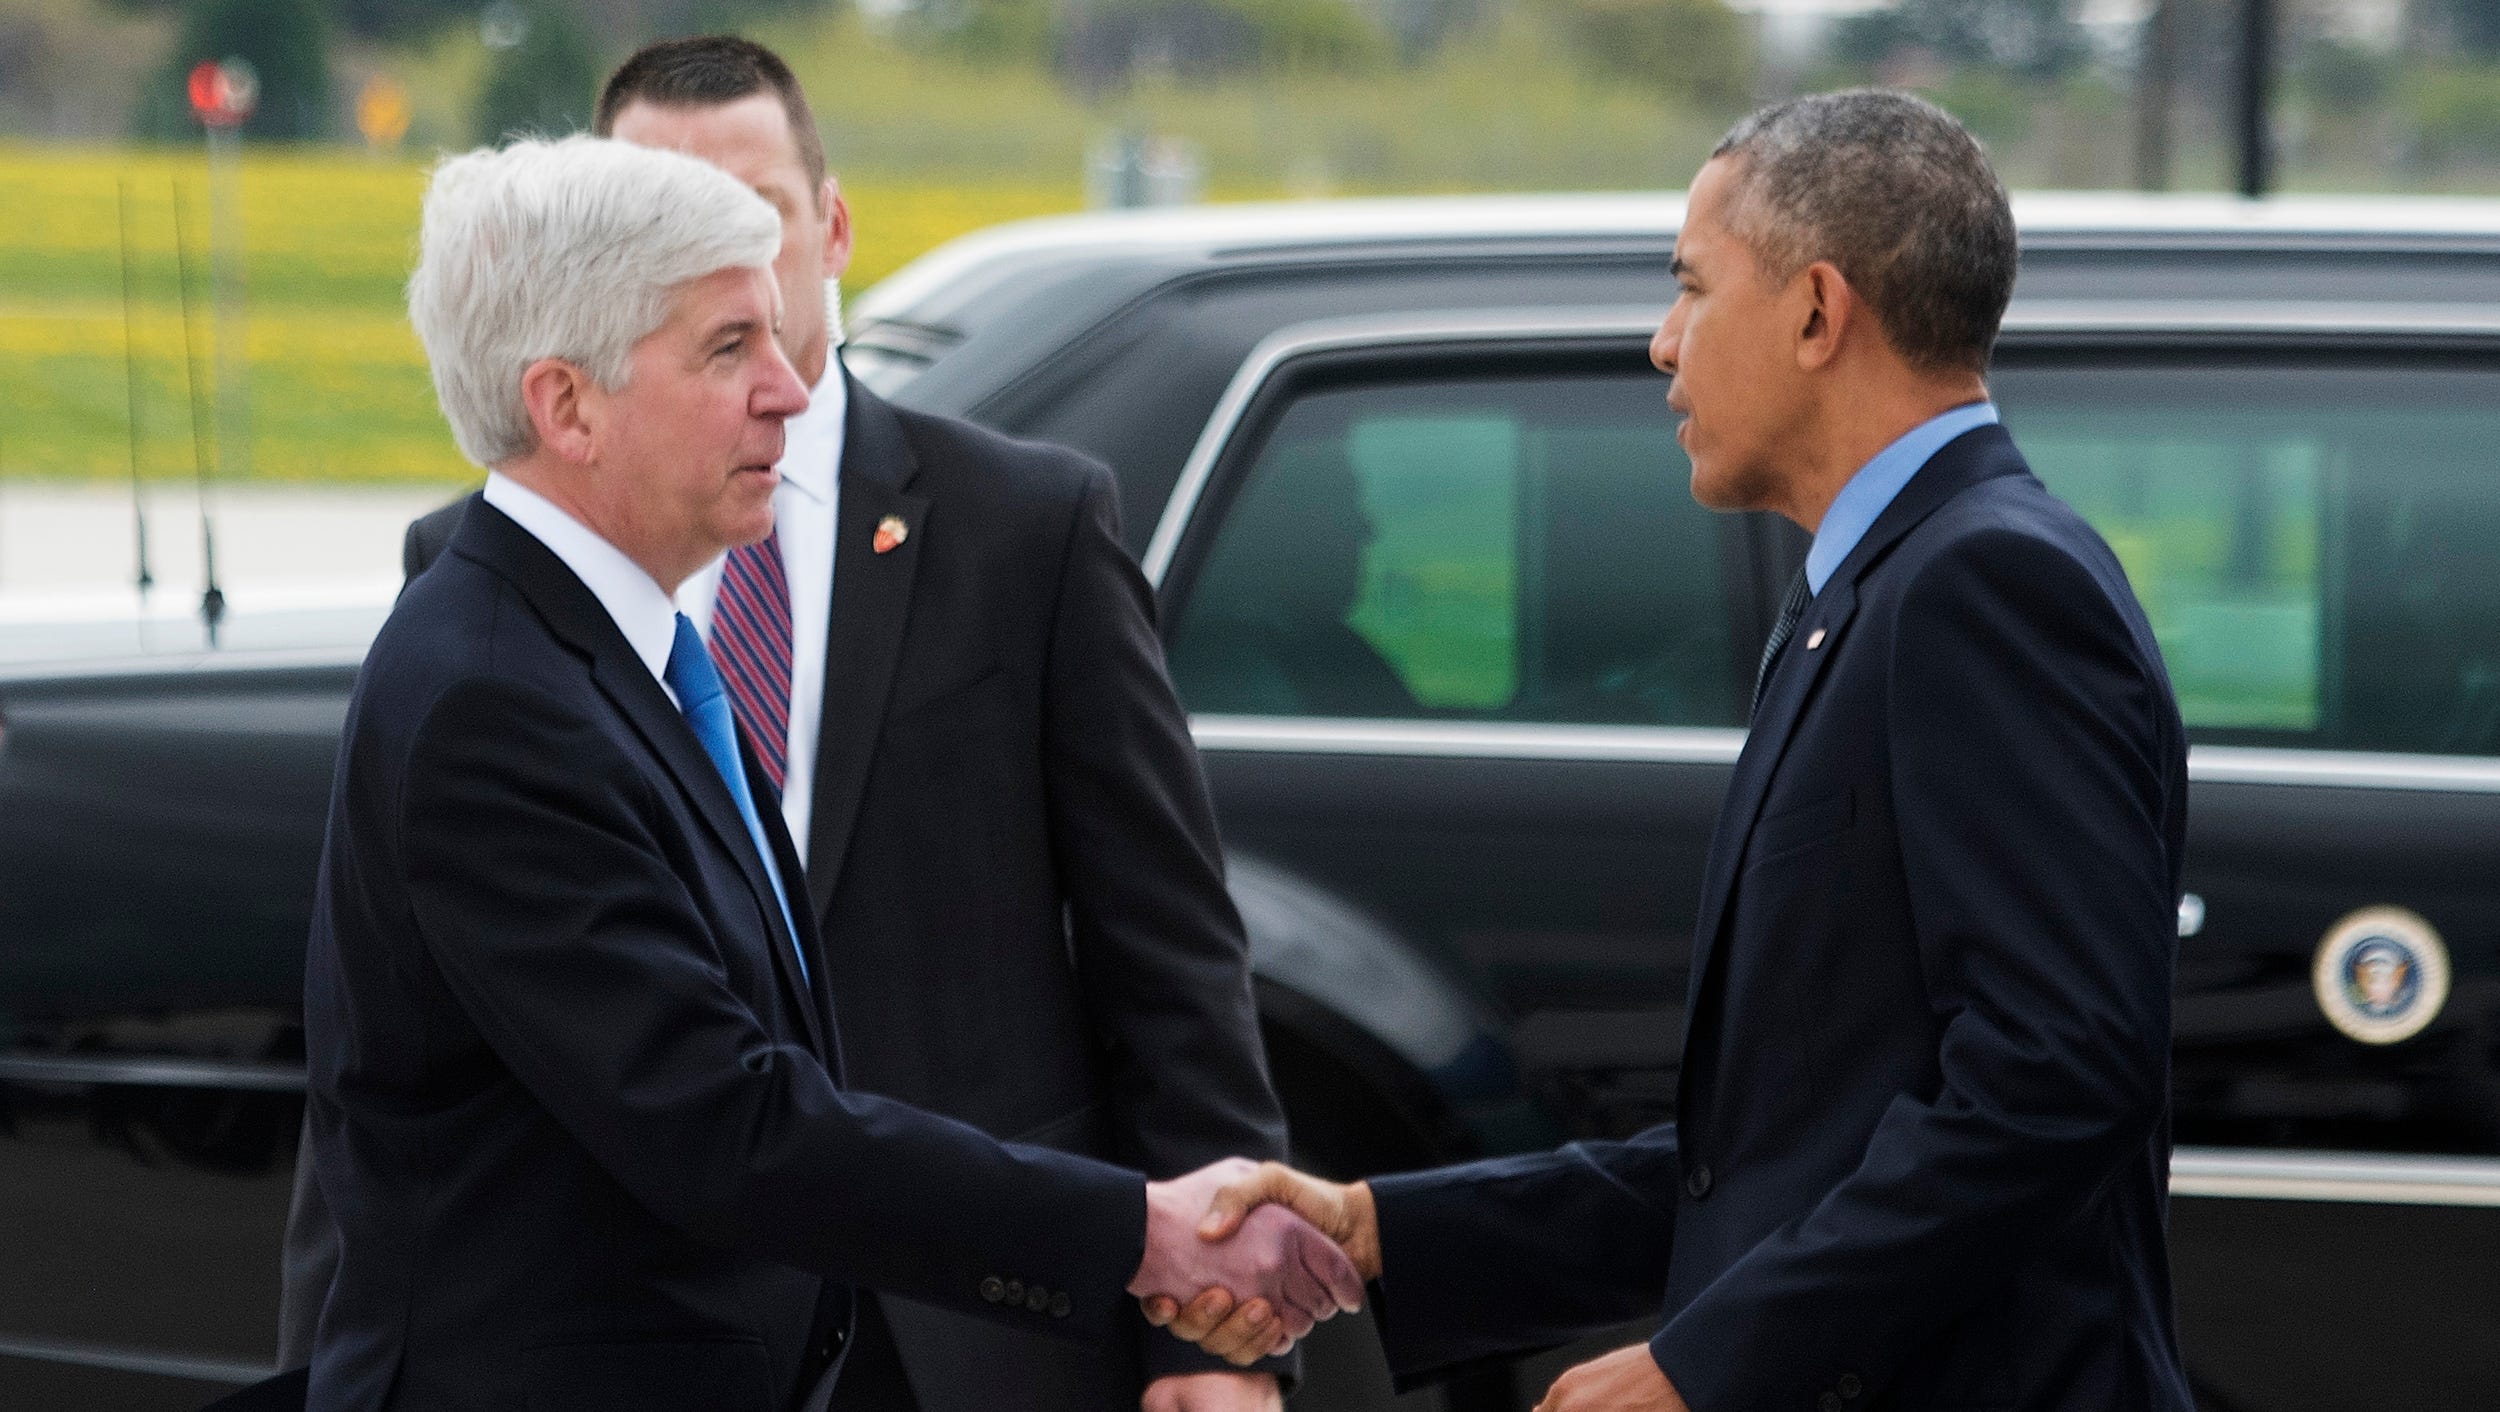 Michigan Gov. Rick Snyder greets President Barack Obama as he arrives to Bishop International Airport in Air Force One.